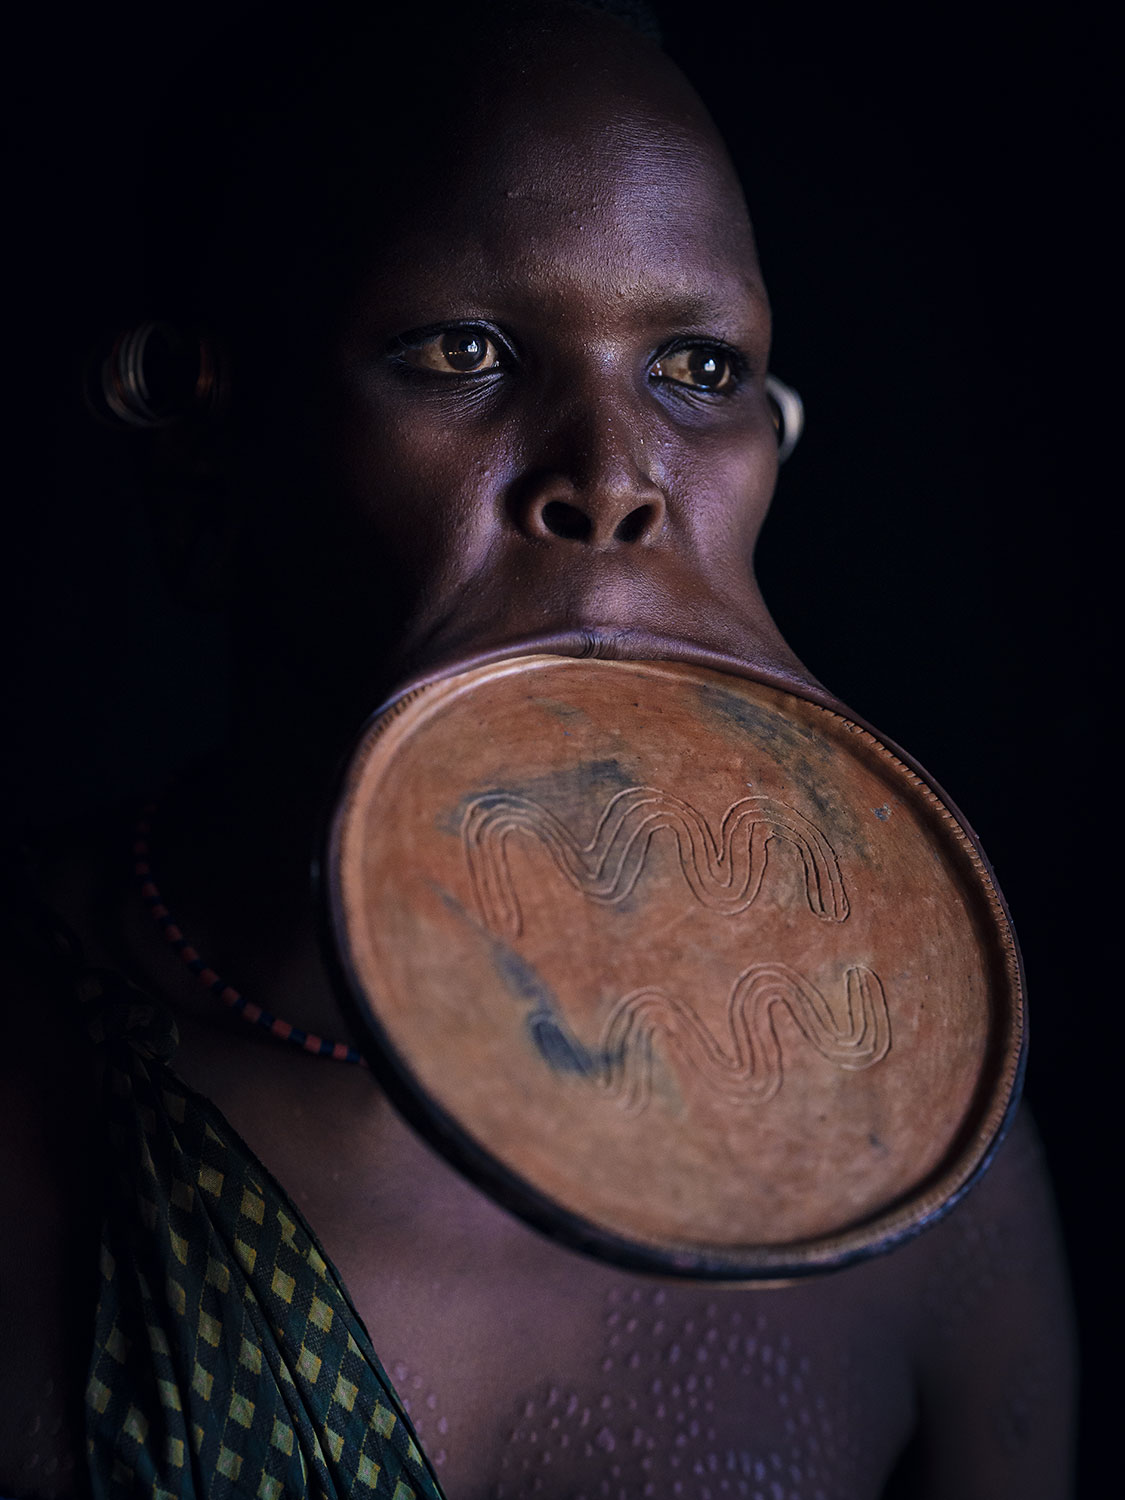 Shooting “Raw” in the Omo Valley - Fuji X Passion